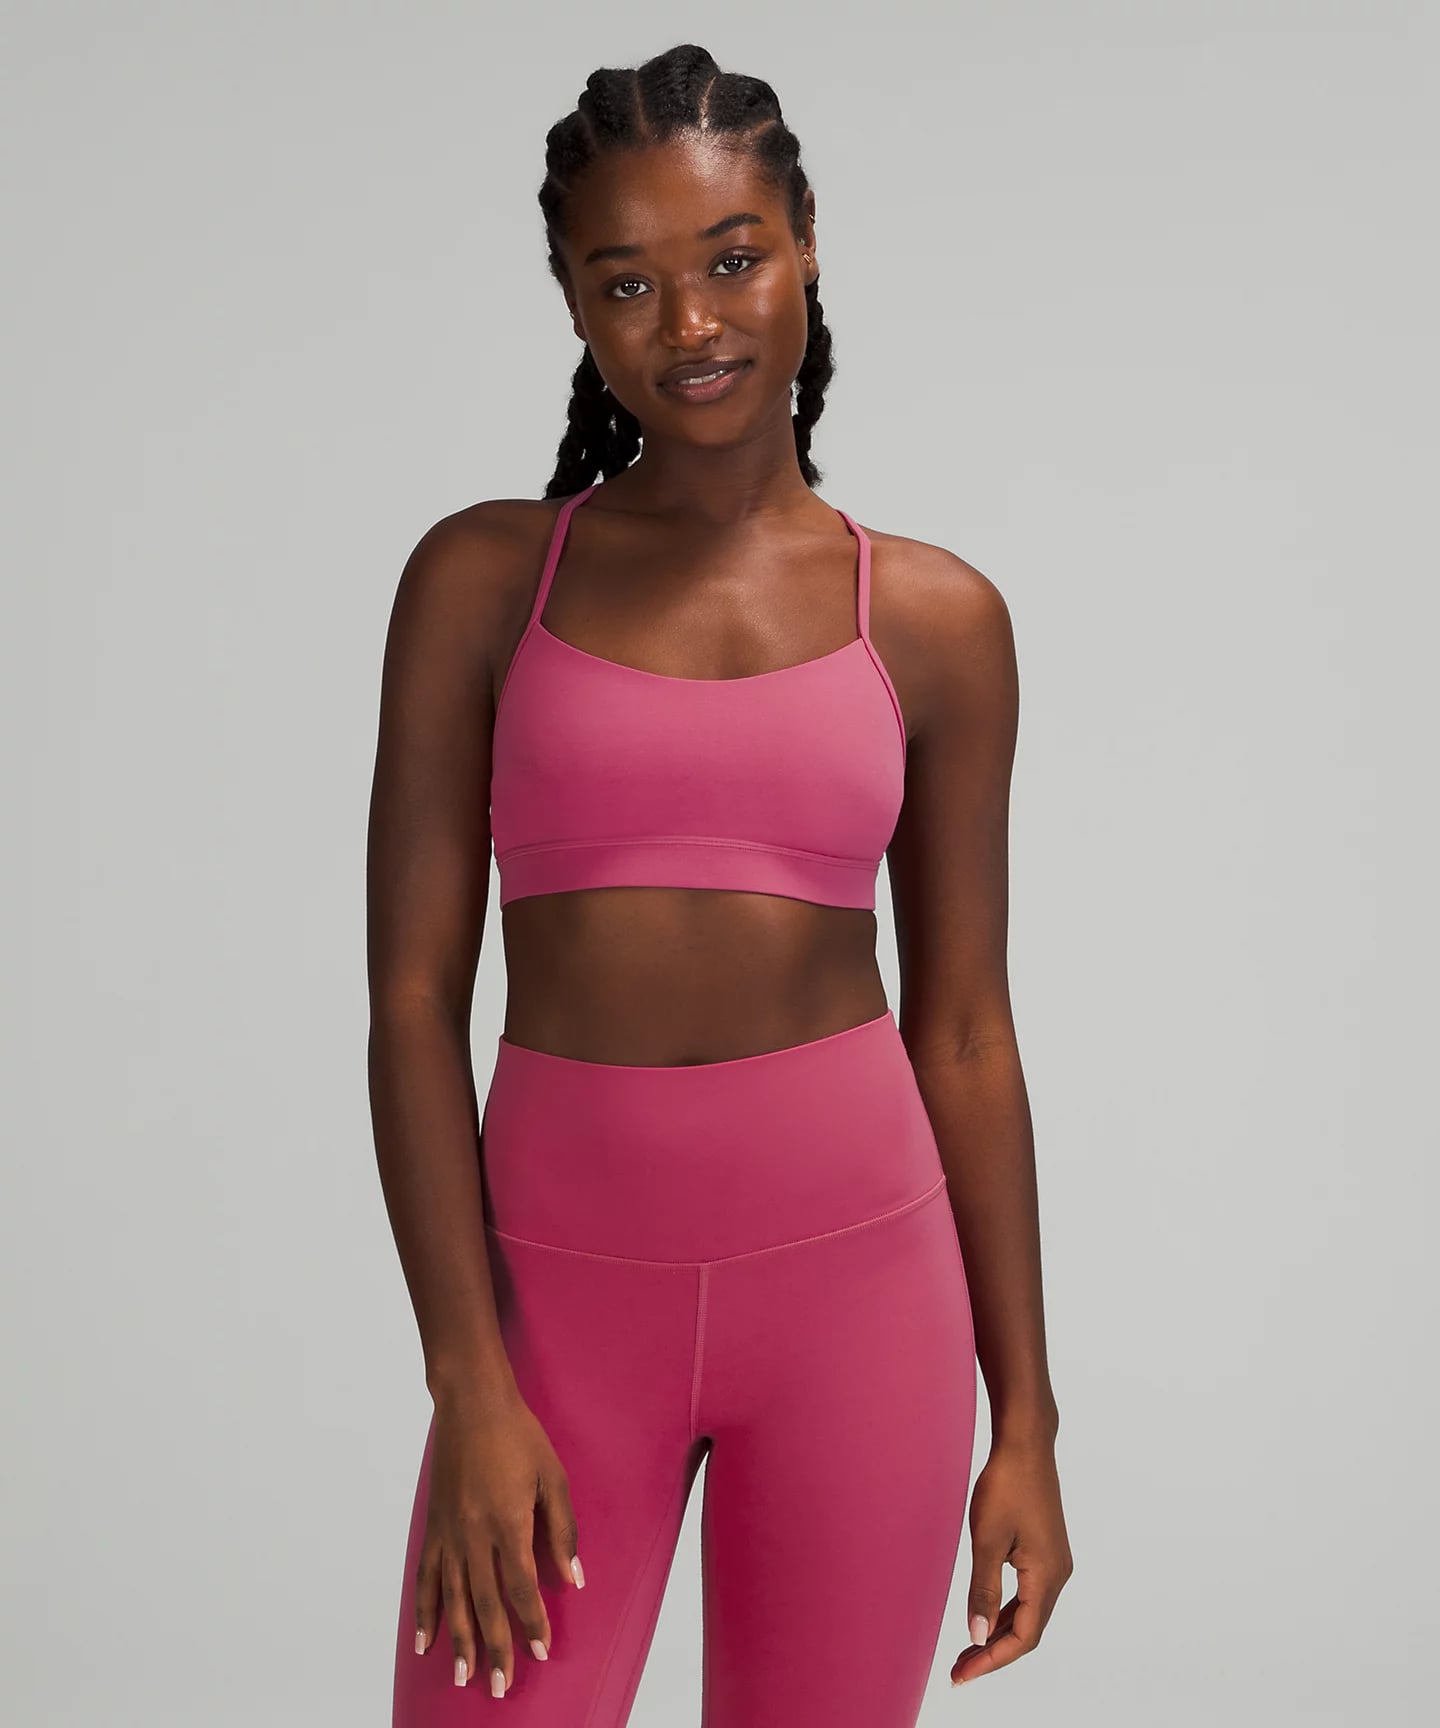 20 Best Sports Bra Brands To Make Workouts Fun And Effective